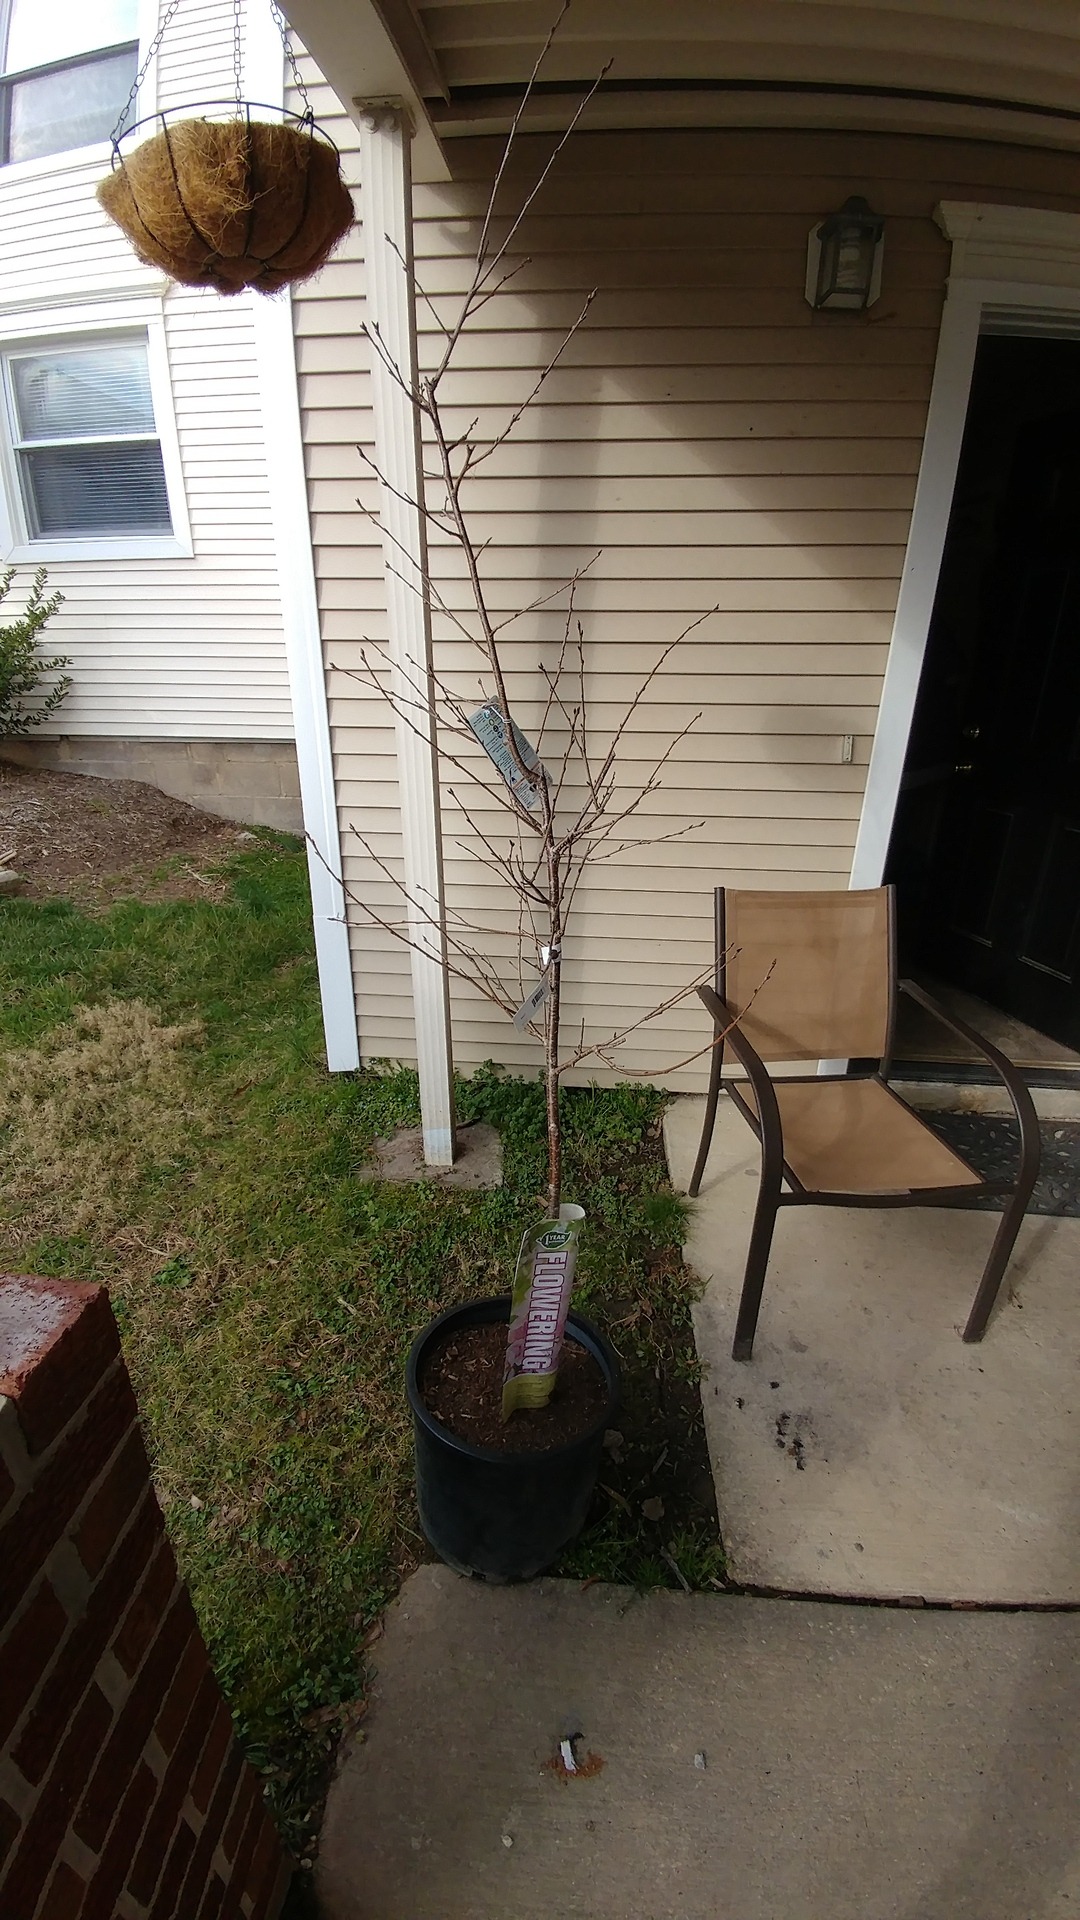 So i bought my mother in law a yoshino cherry blossom tree,which i believe is the